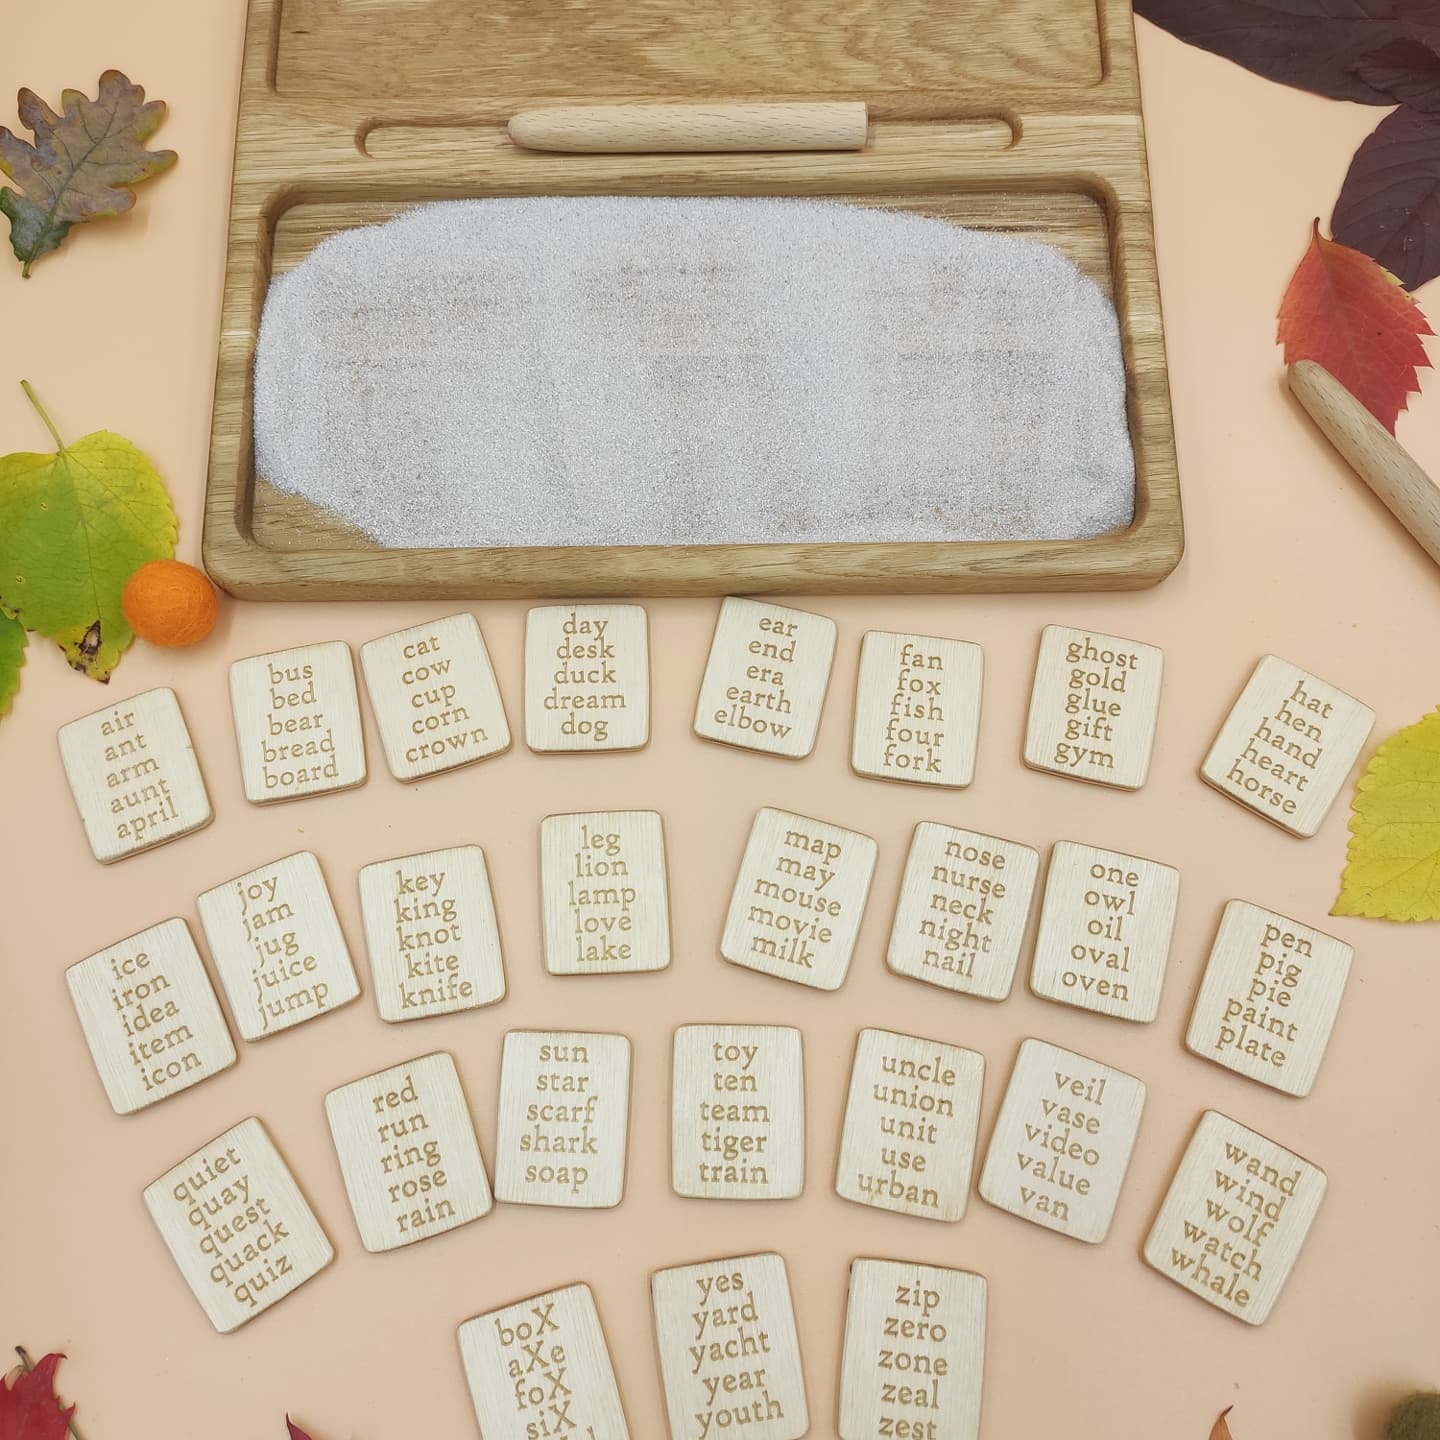 Sand tray with letters cards, educational materials for writing